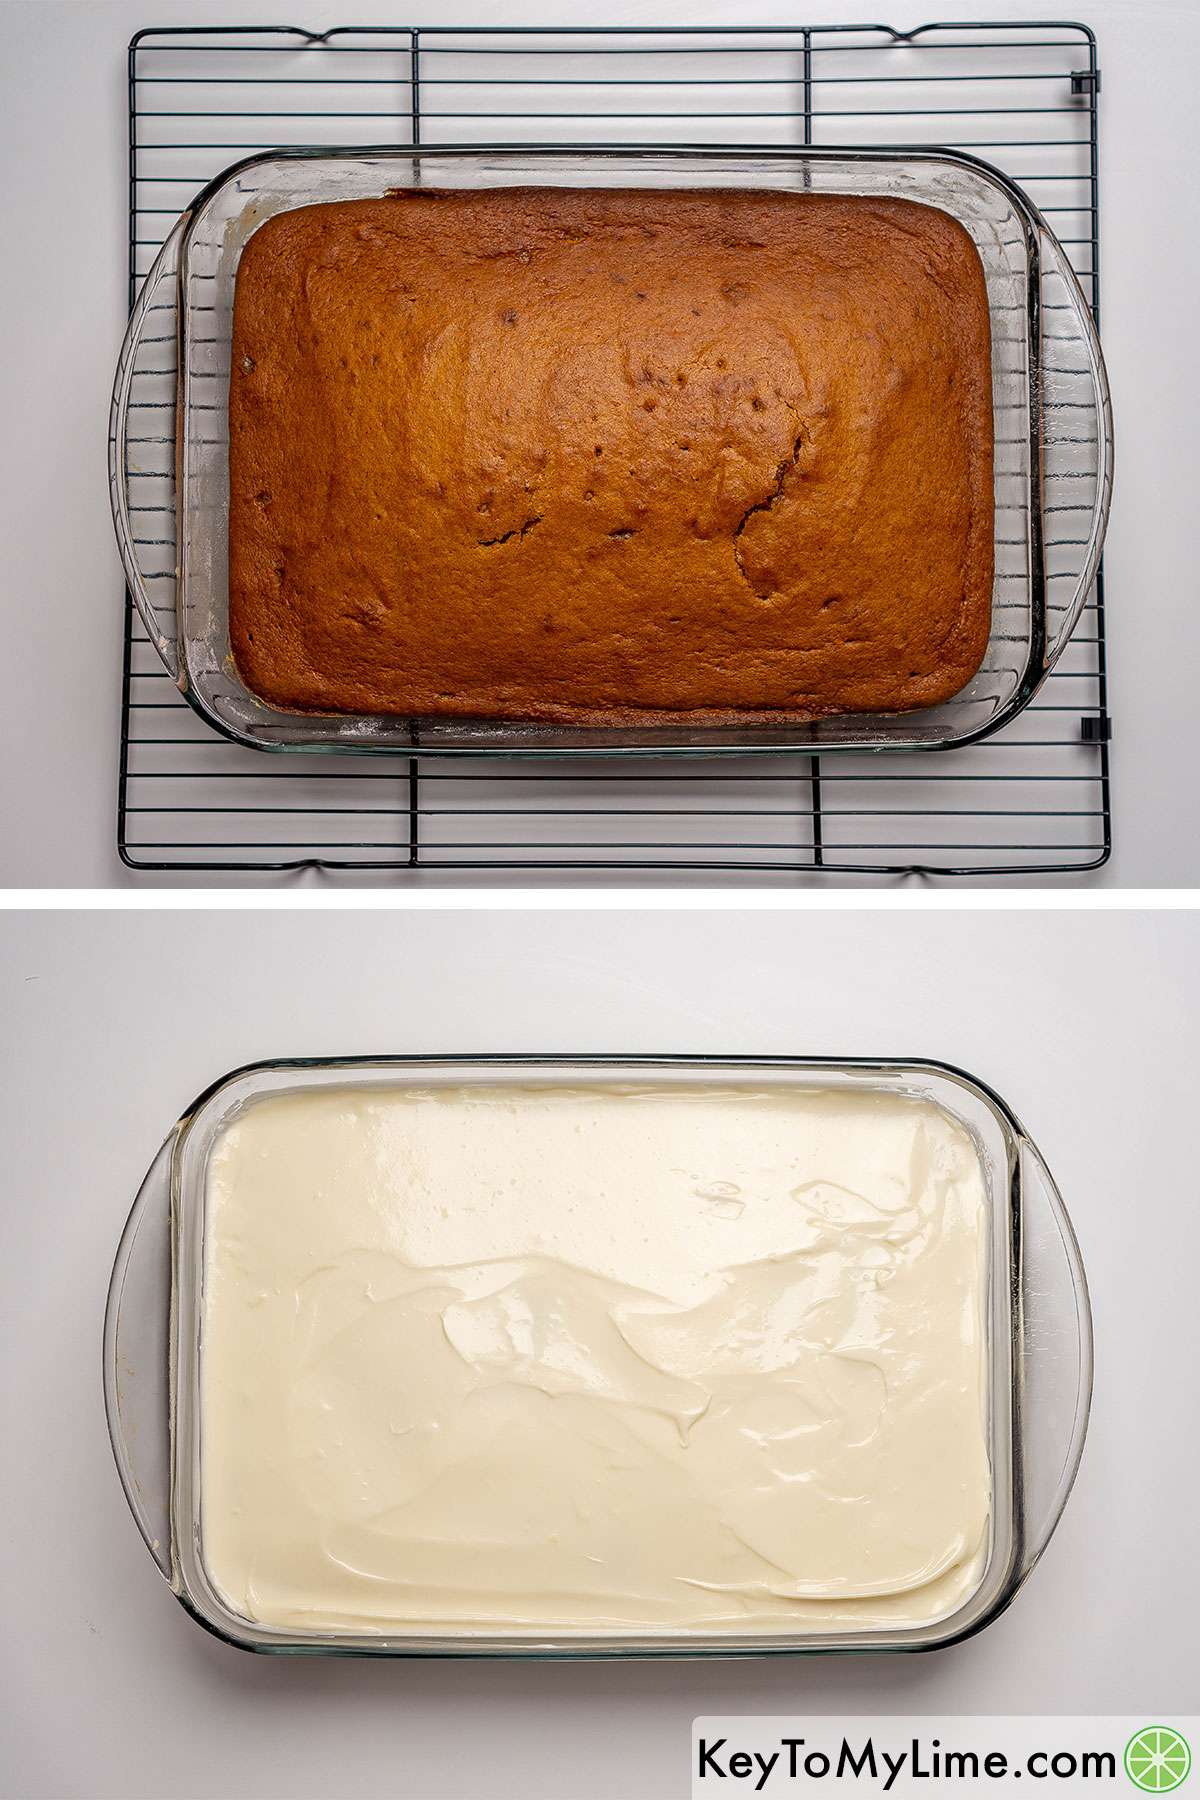 Cooling the pumpkin cake before adding the cream cheese frosting.